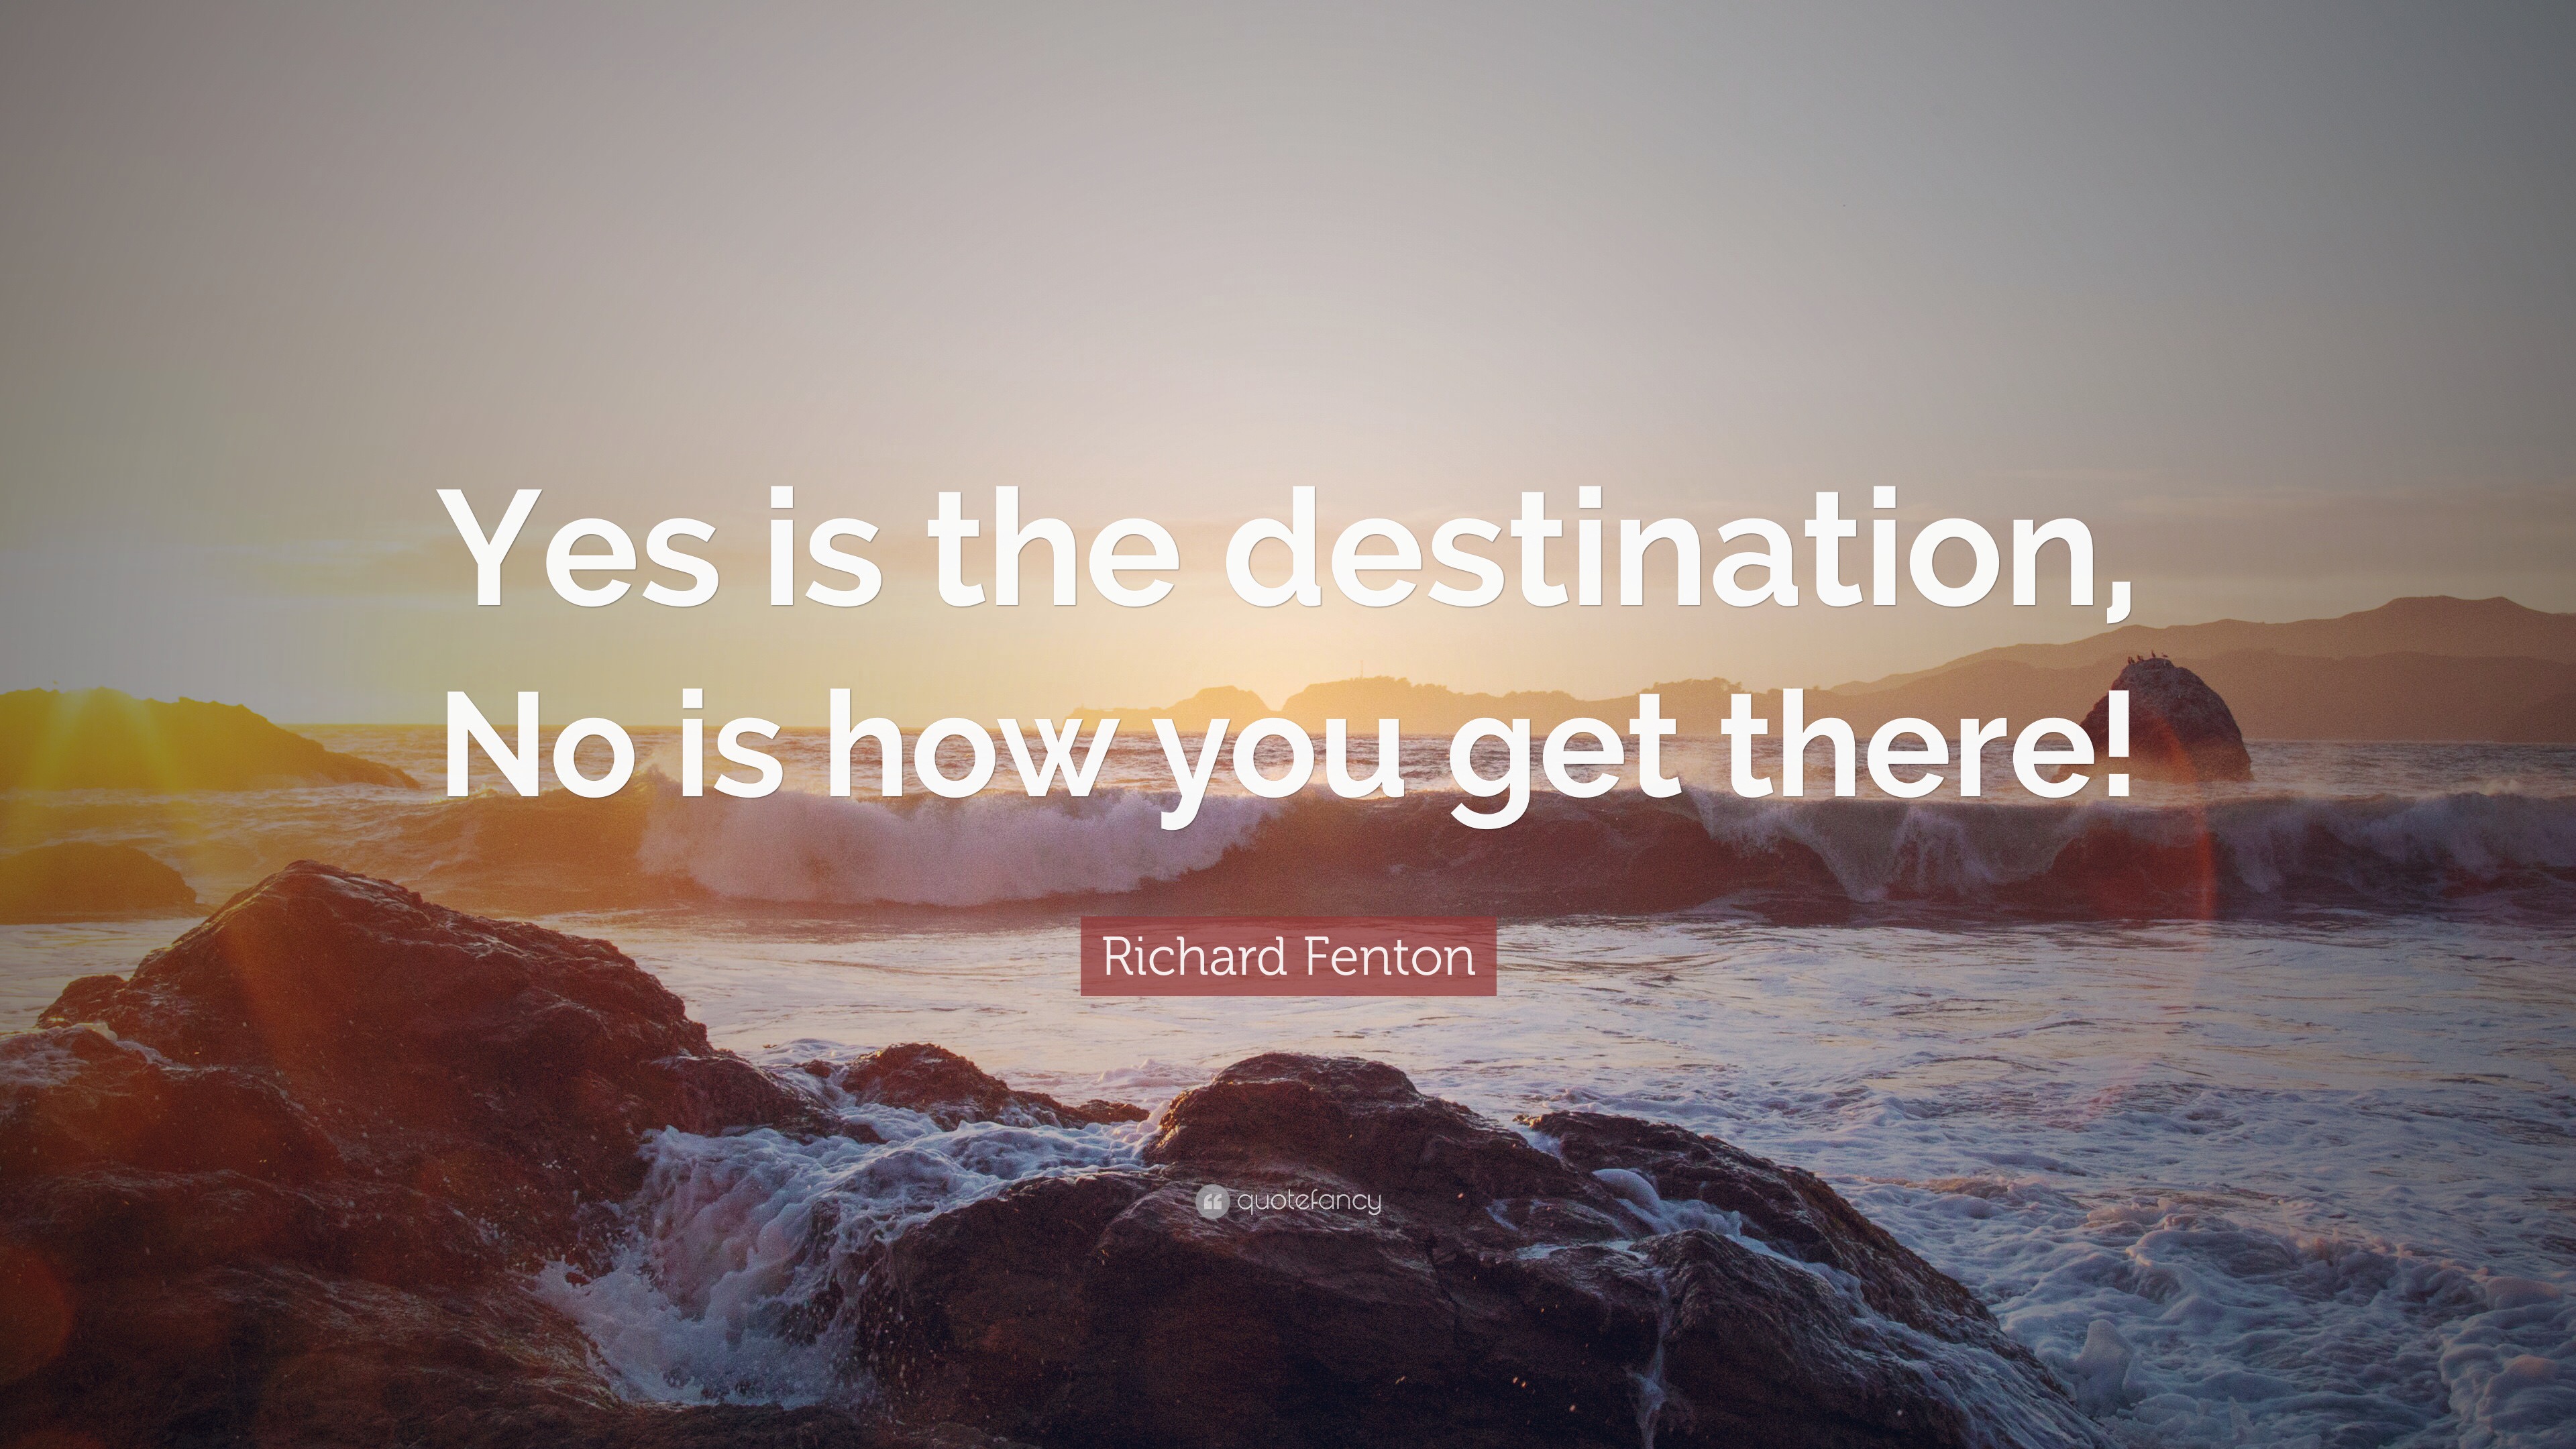 Go for No!: Yes Is the Destination, No Is How You Get There